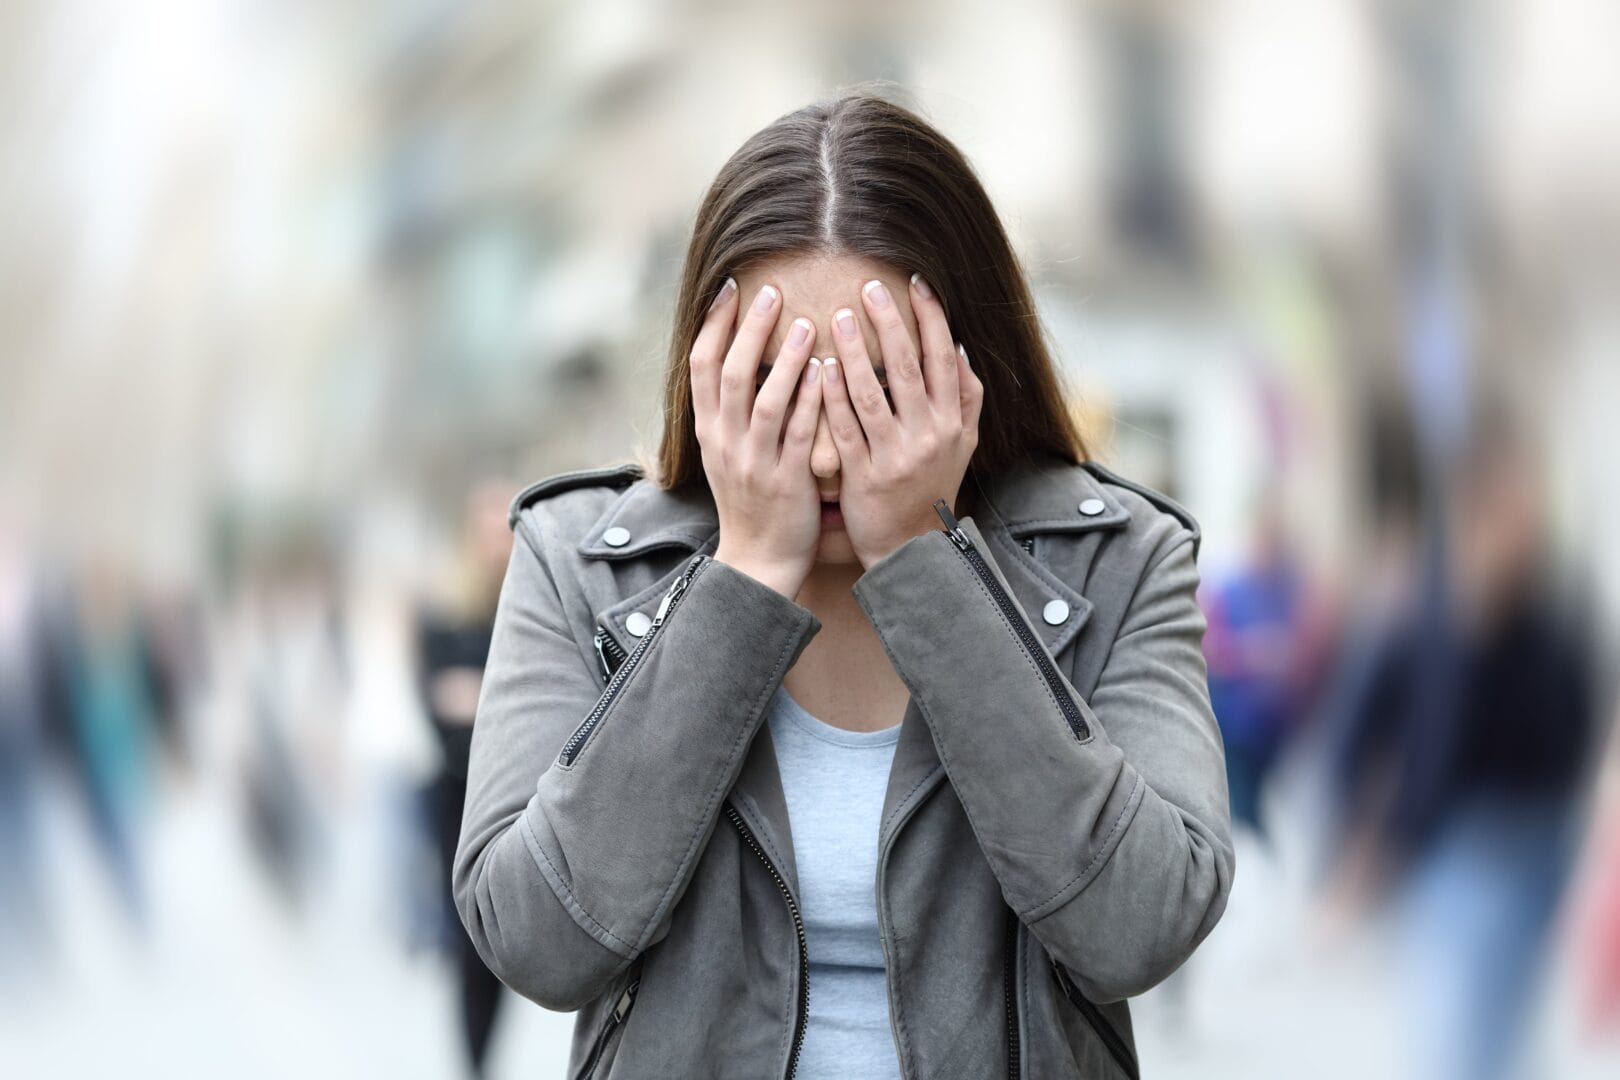 Woman showing the signs of social anxiety disorder